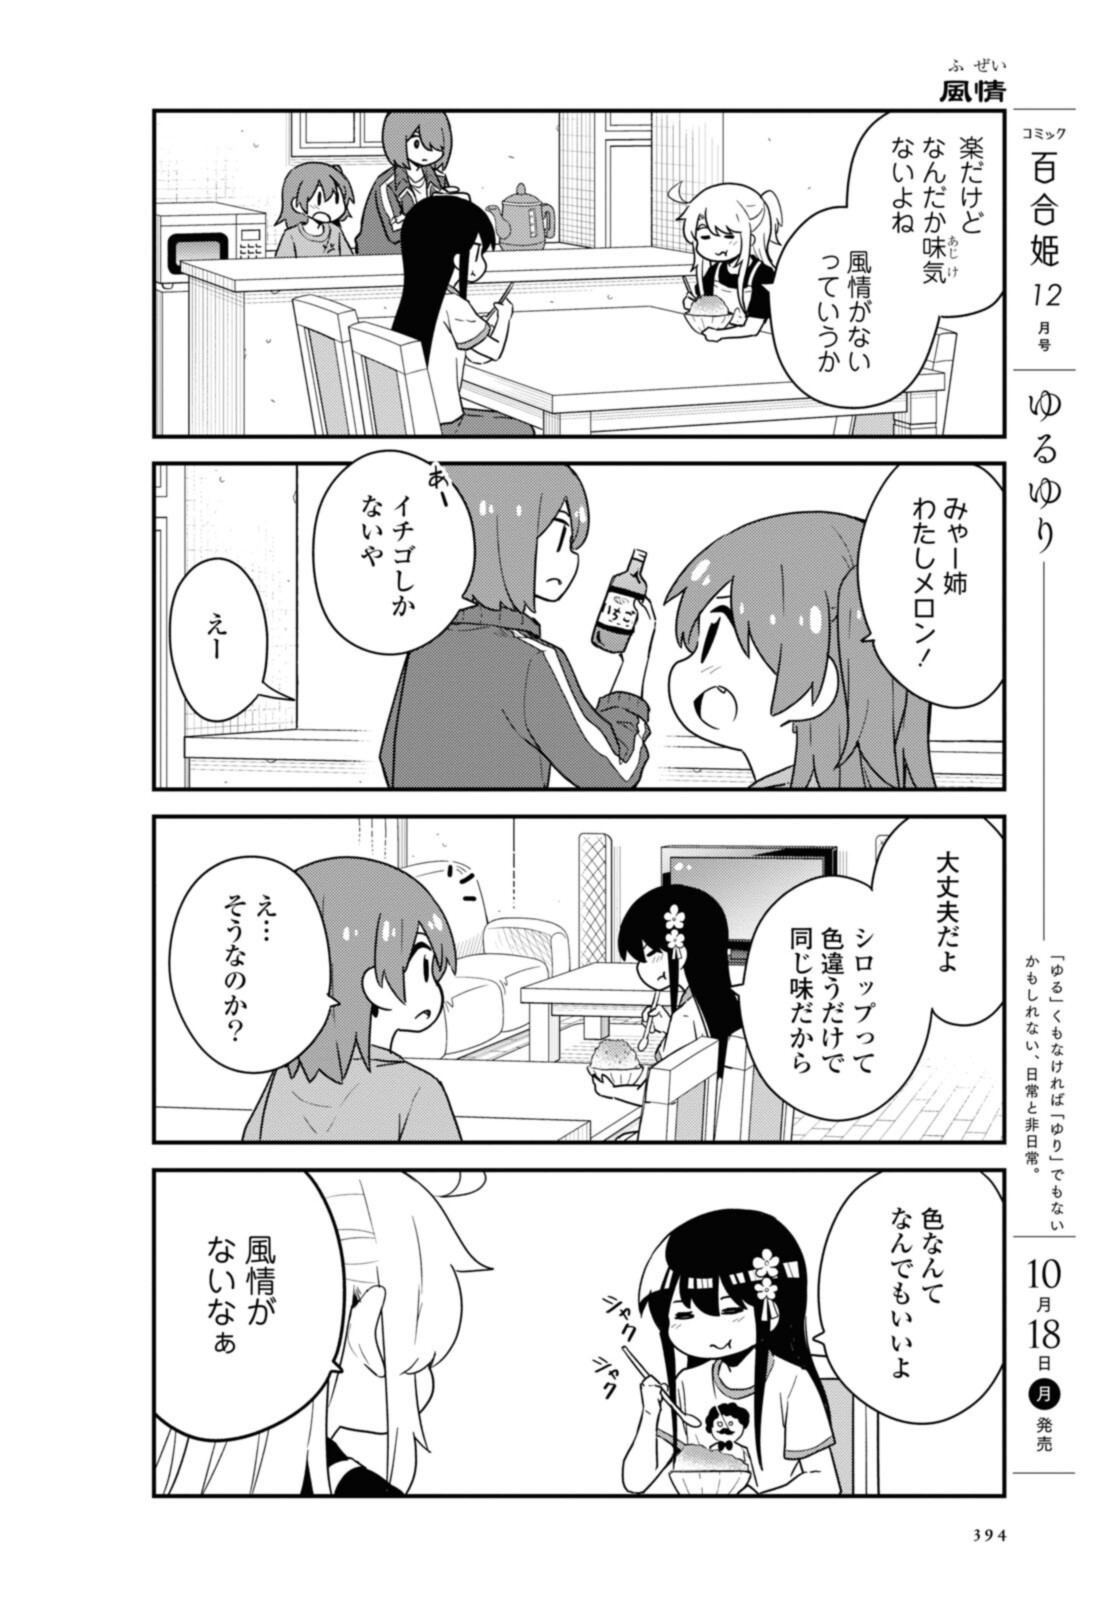 Wataten! An Angel Flew Down to Me 私に天使が舞い降りた！ 第88話 - Page 7